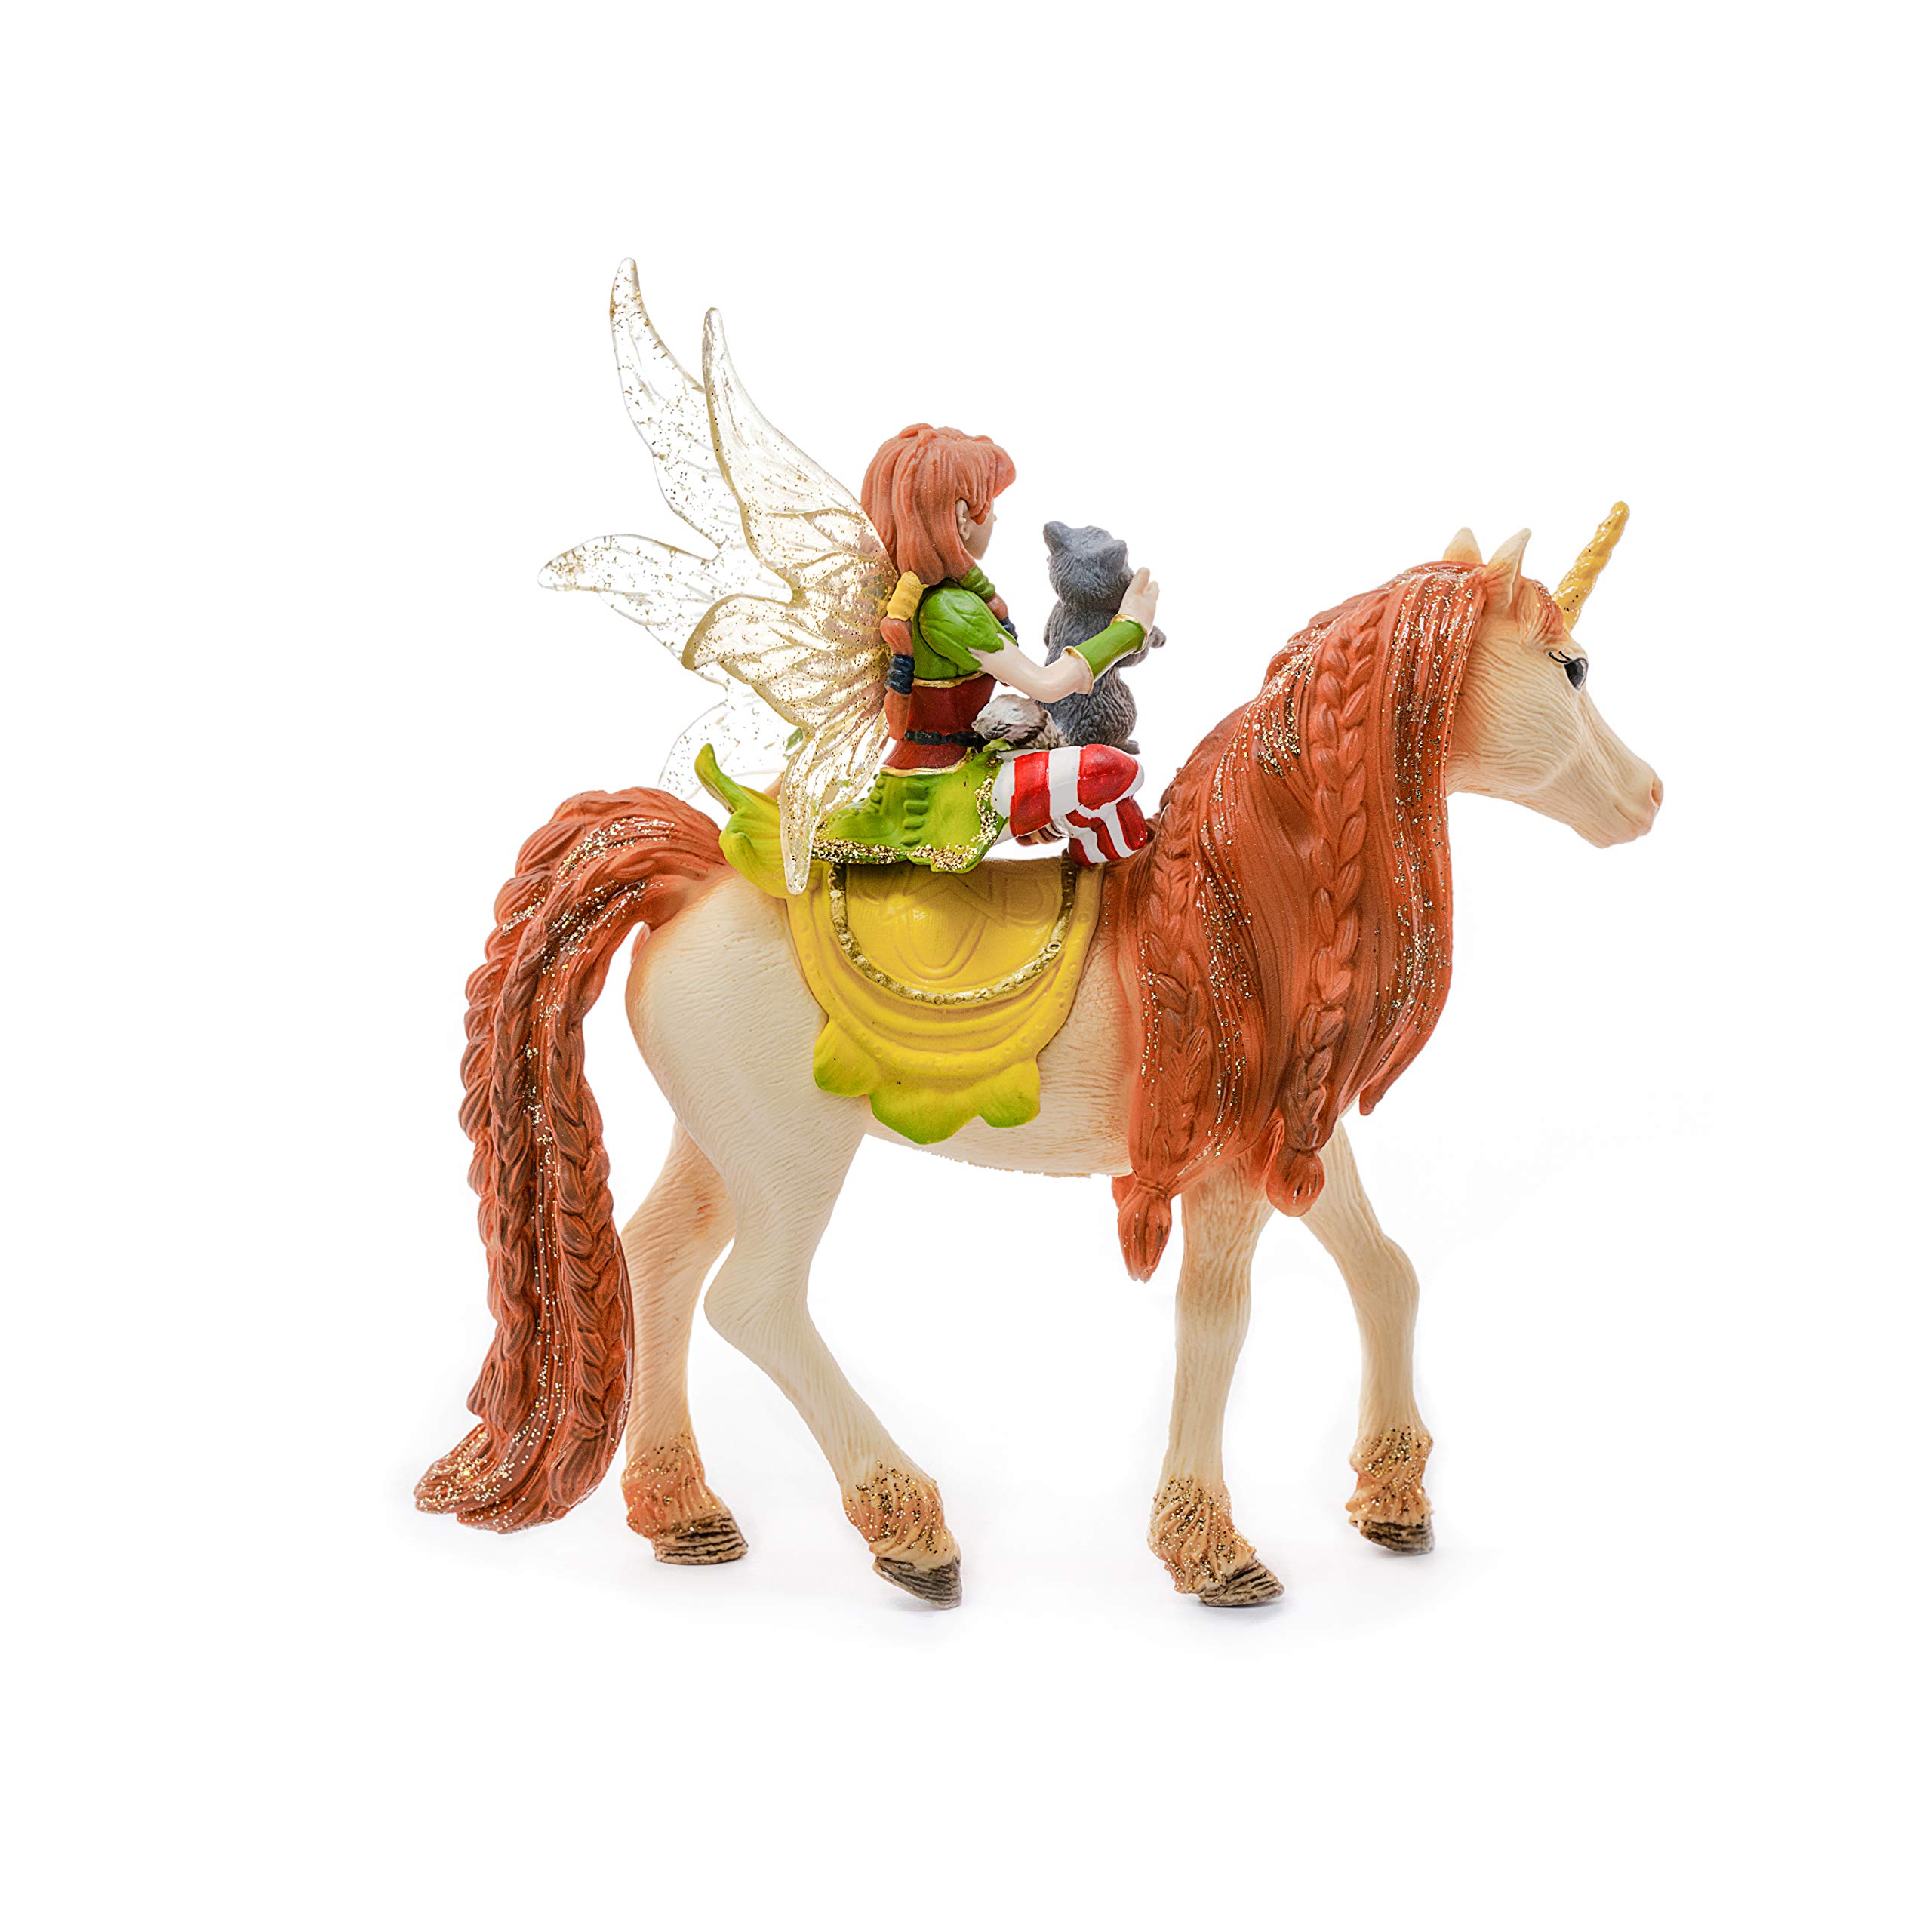 Schleich bayala, Fairy Unicorn Toys for Girls and Boys, Fairy Marween Doll with Glitter Unicorn Toy, Ages 5+